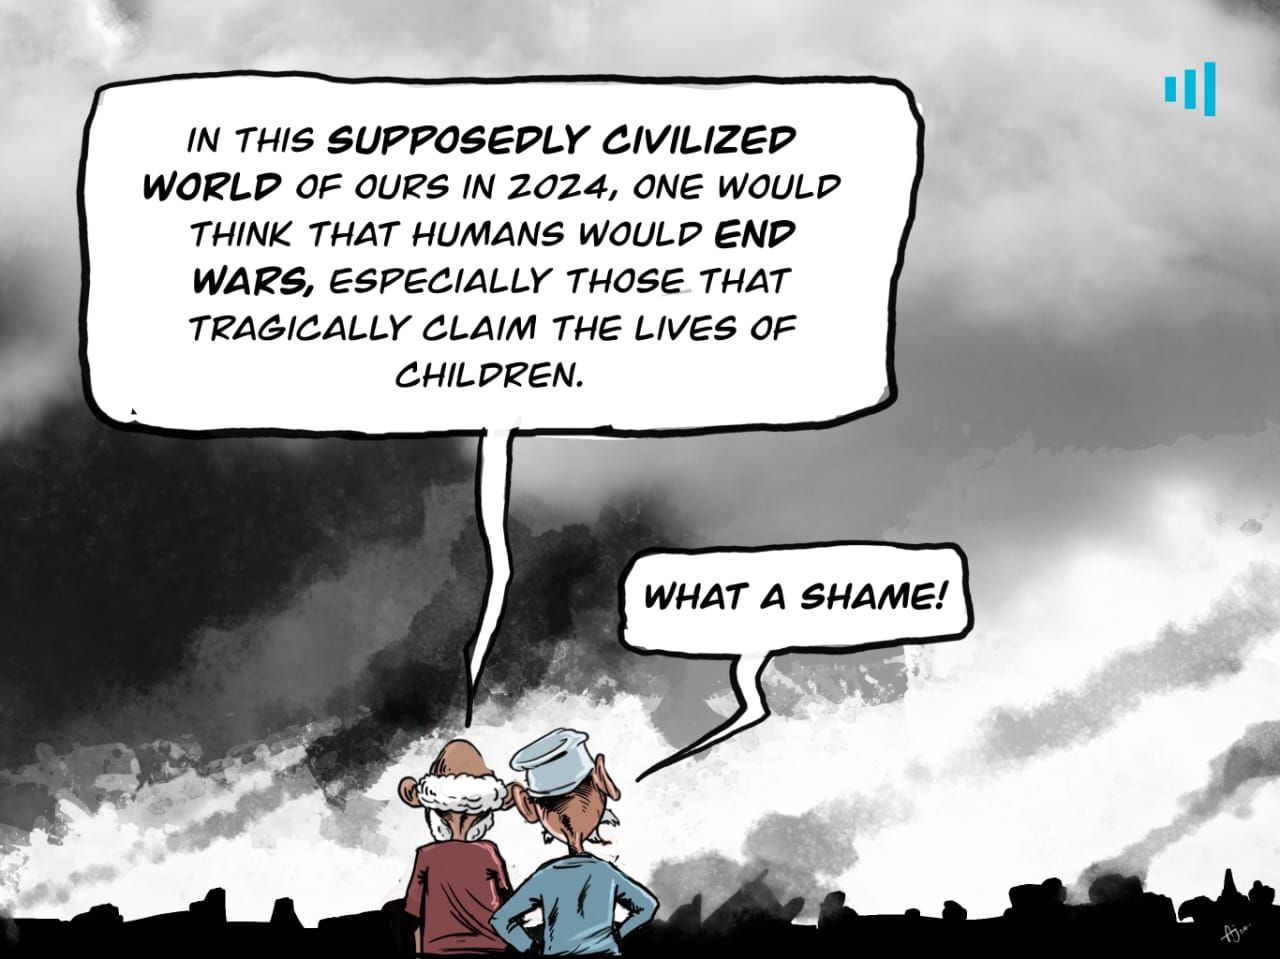 Illustration of two people lamenting over child casualties in wars in 2024, with dialogue bubbles expressing sorrow and shame.